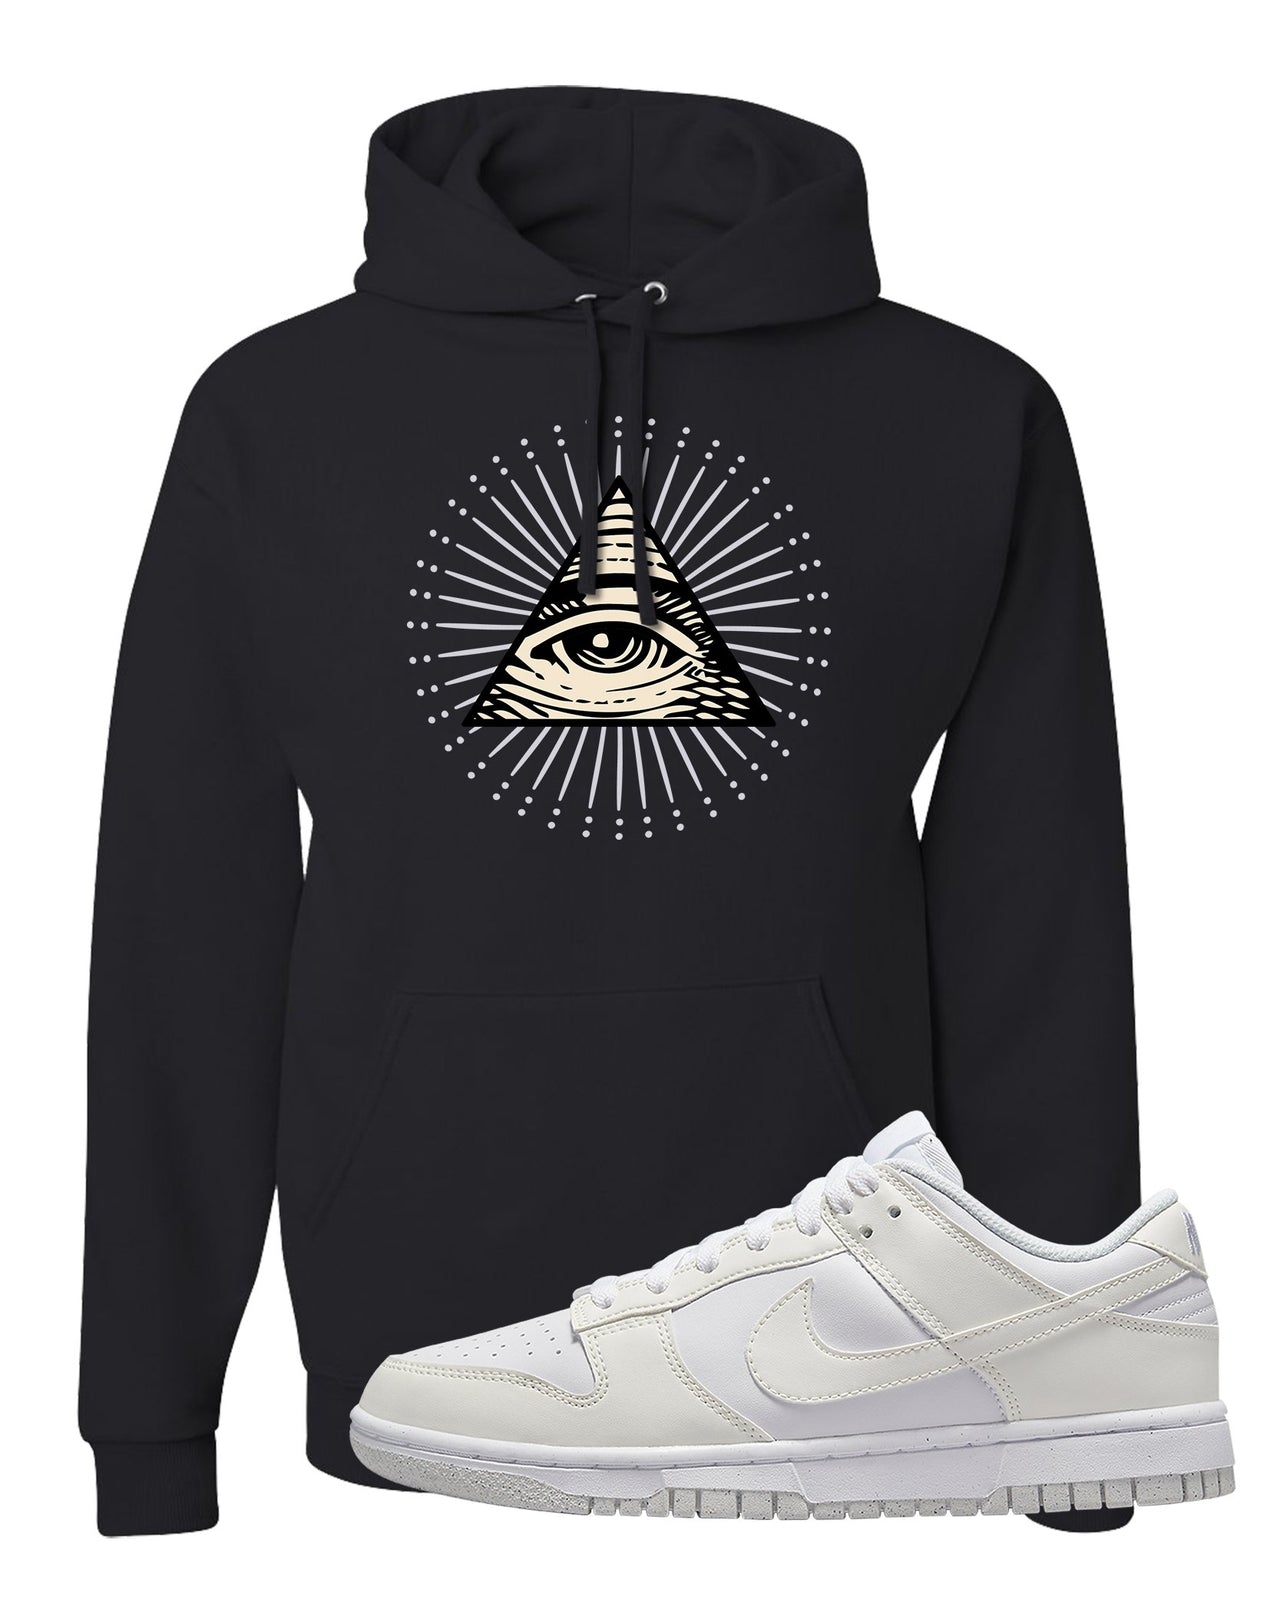 Next Nature White Low Dunks Hoodie | All Seeing Eye, Black